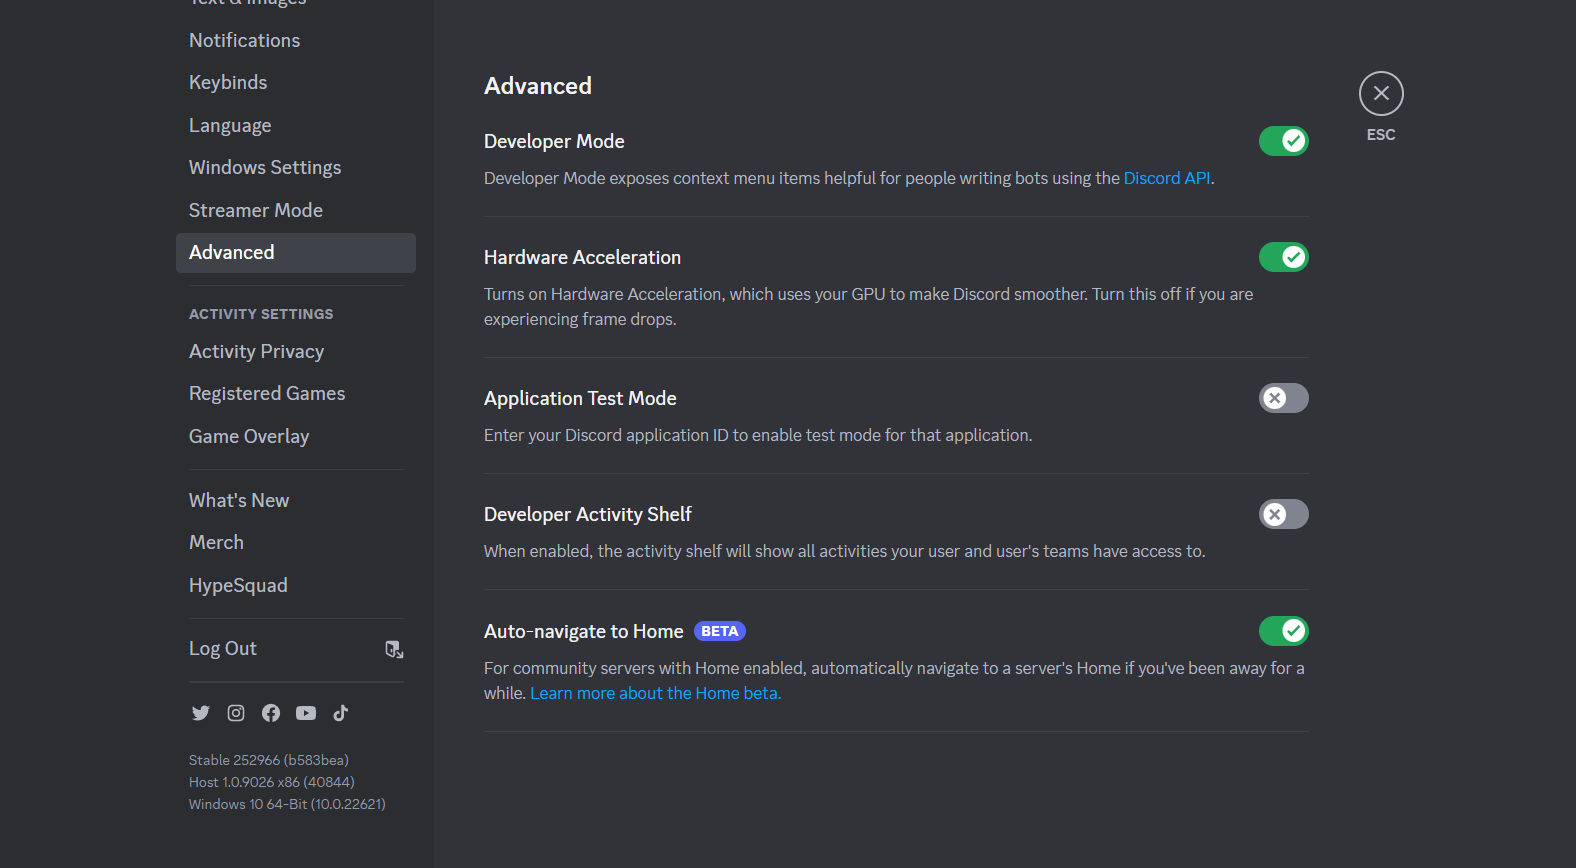 Image of the Discord application dashboard after first visiting https://discord.com/developers/applications